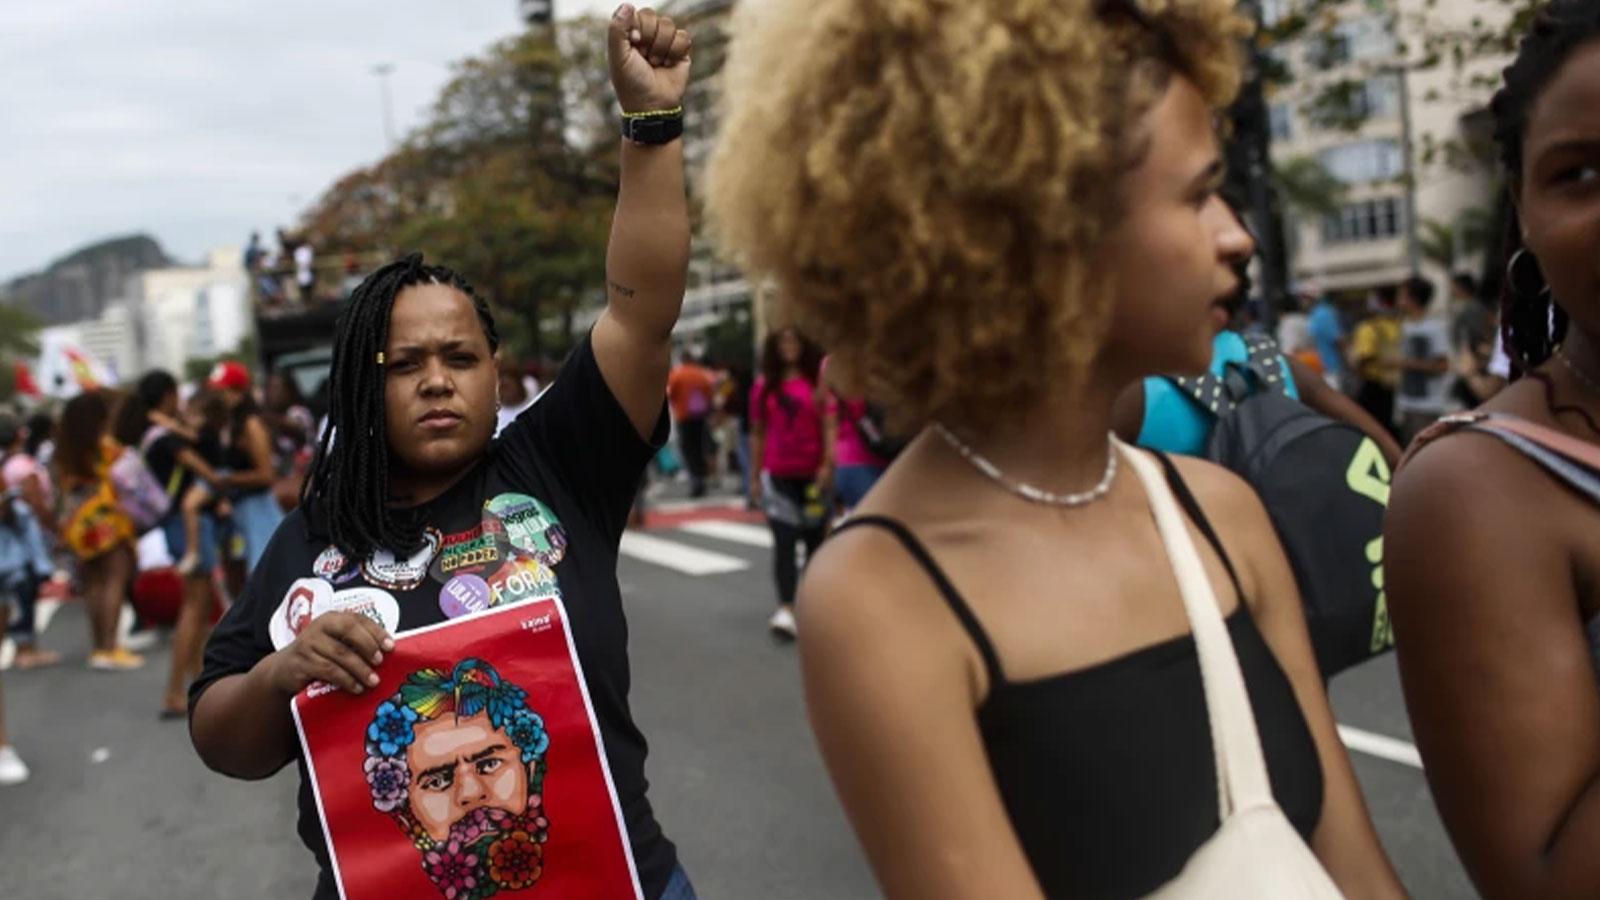 A woman raises her fist while holding a sign with a visage of then former President Luiz Inacio Lula da Silva during a Black Women’s March in Rio de Janeiro, Brazil, July 31, 2022.